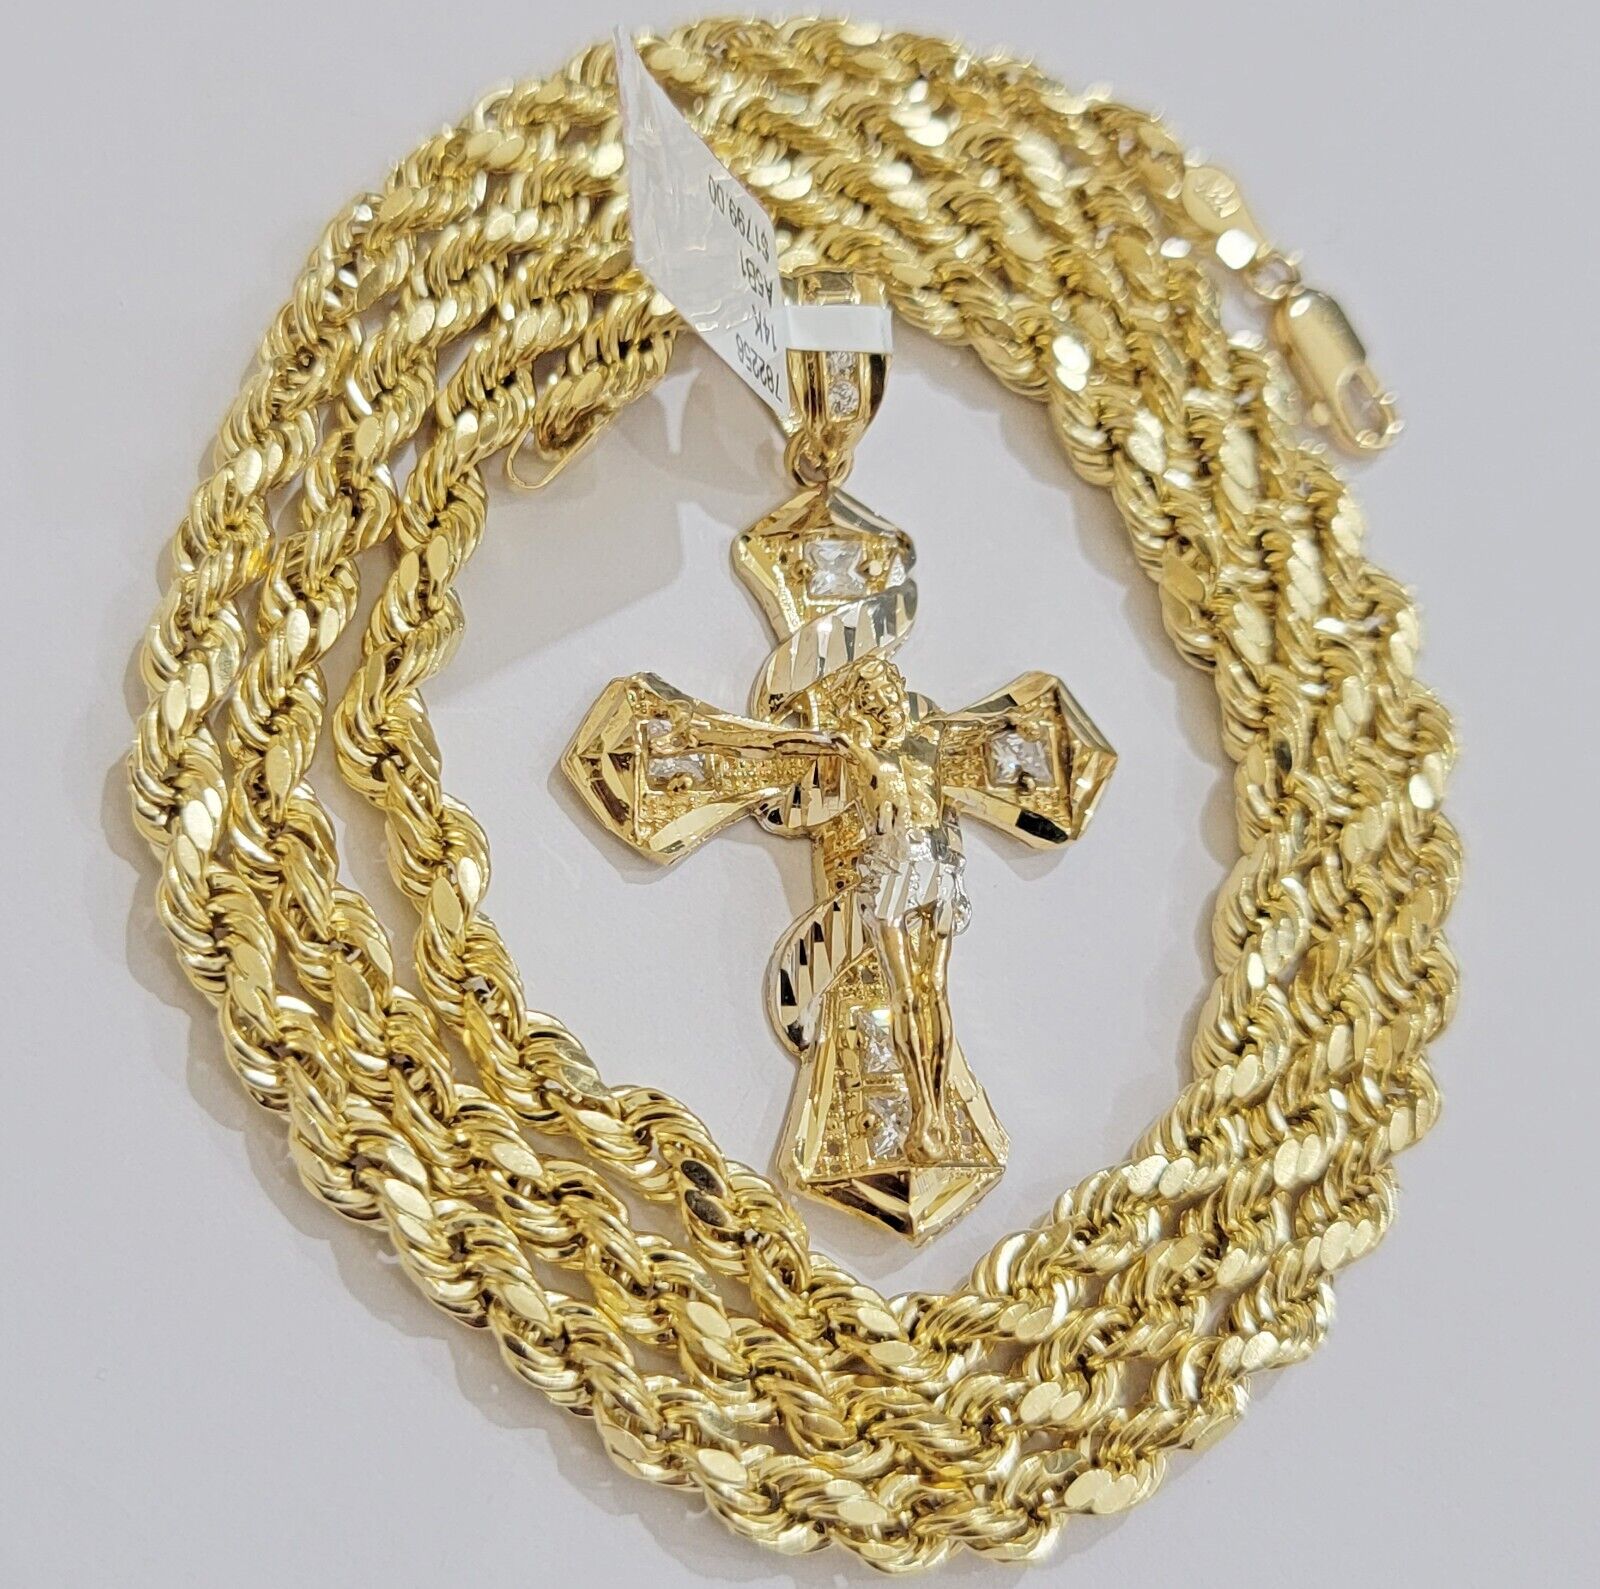 10k Gold Rope Chain Necklace Jesus Cross Charm Pendant Set 18-28" inch 5mm, REAL